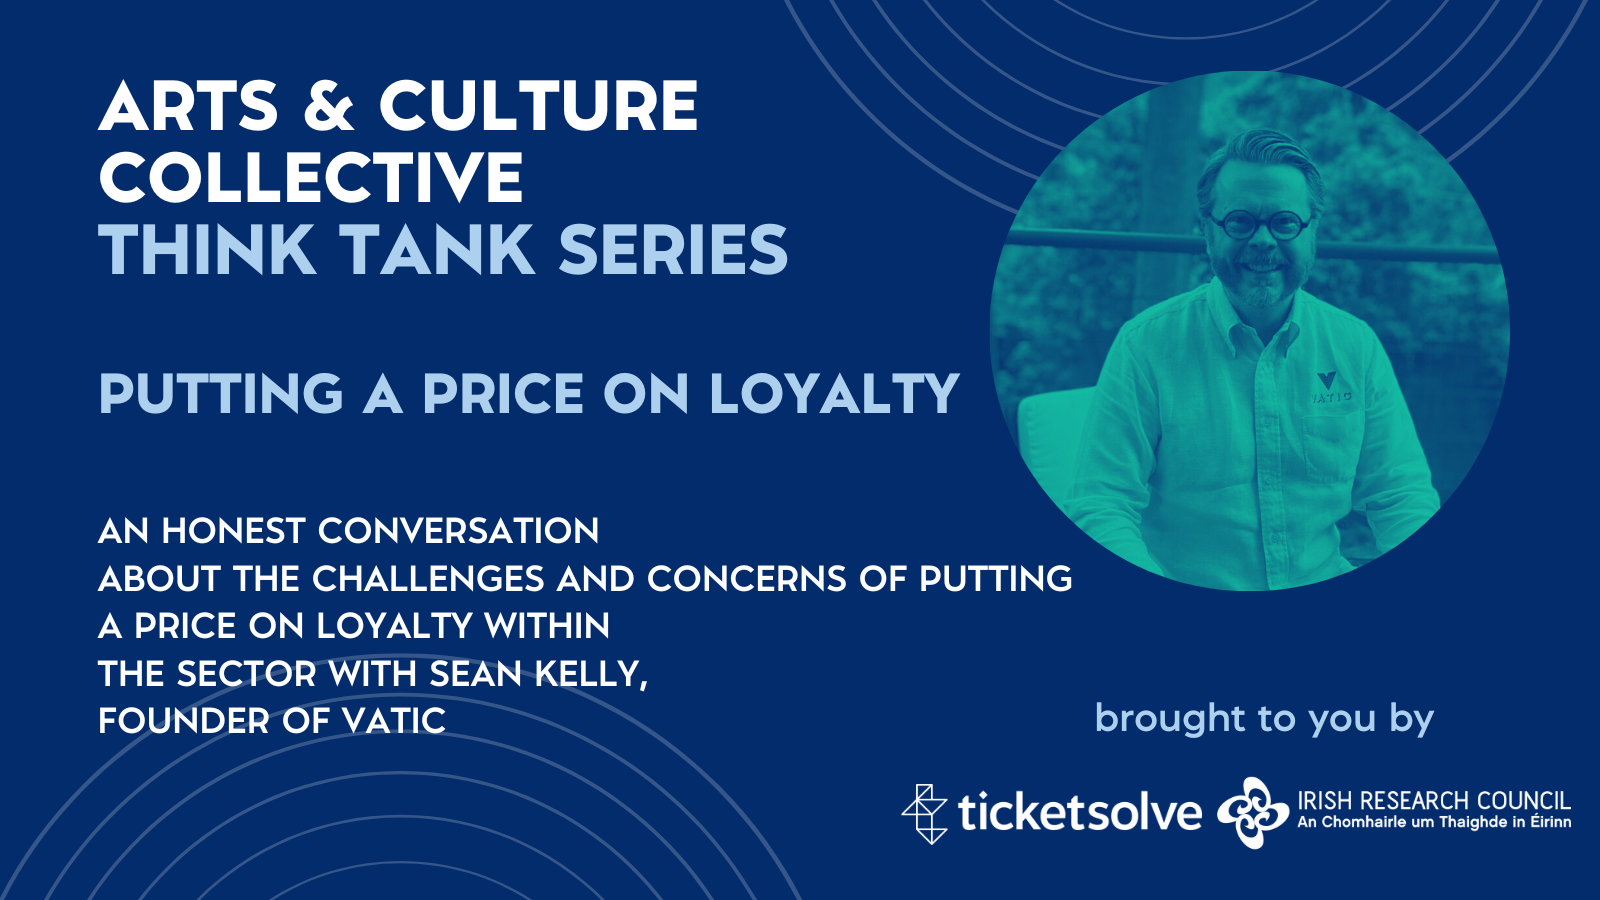 Putting a Price on Loyalty: The Arts & Culture Collective Think Tank